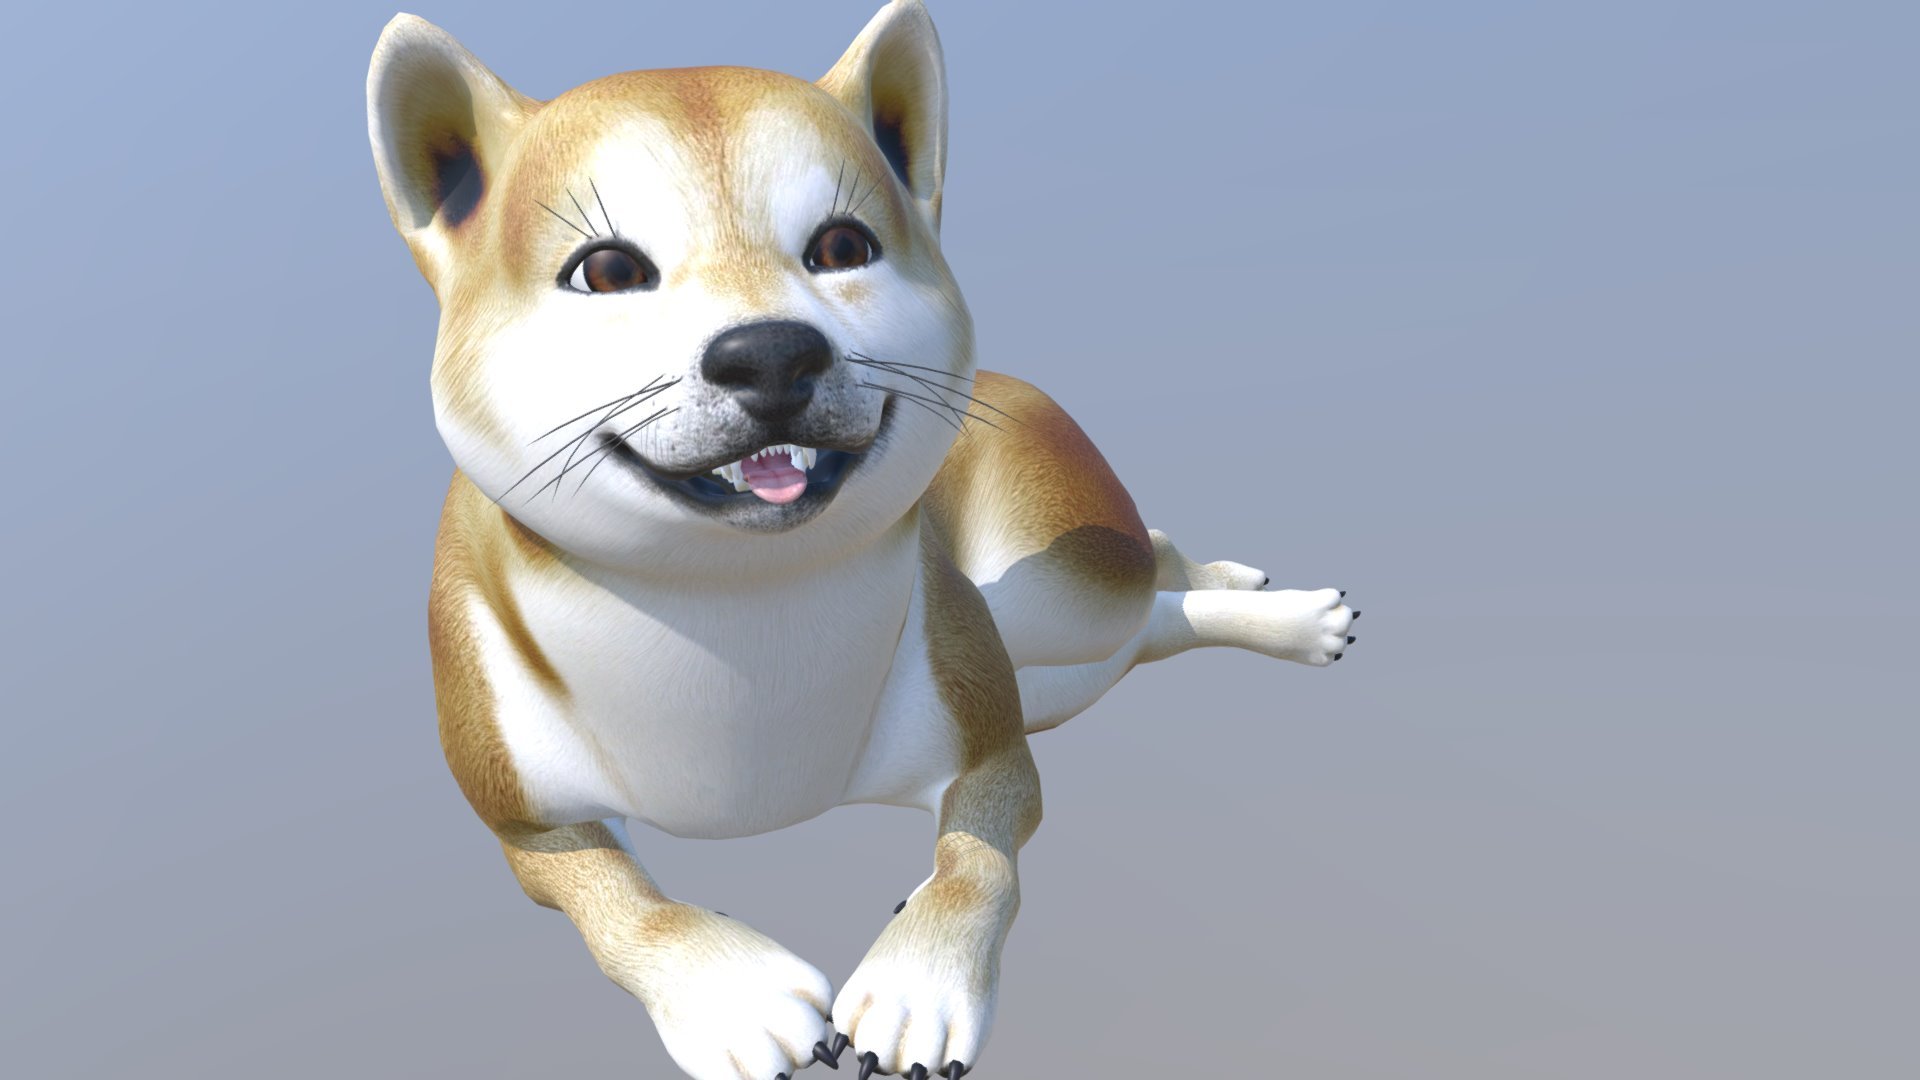 Look at this cute adorable meme dog. Such wow. Such perfection. Woof.
He loves you so much! Why don't you show him some love as well! He will appreciate it! - Shiba Inu Dog - 3D model by HardzGal 3d model